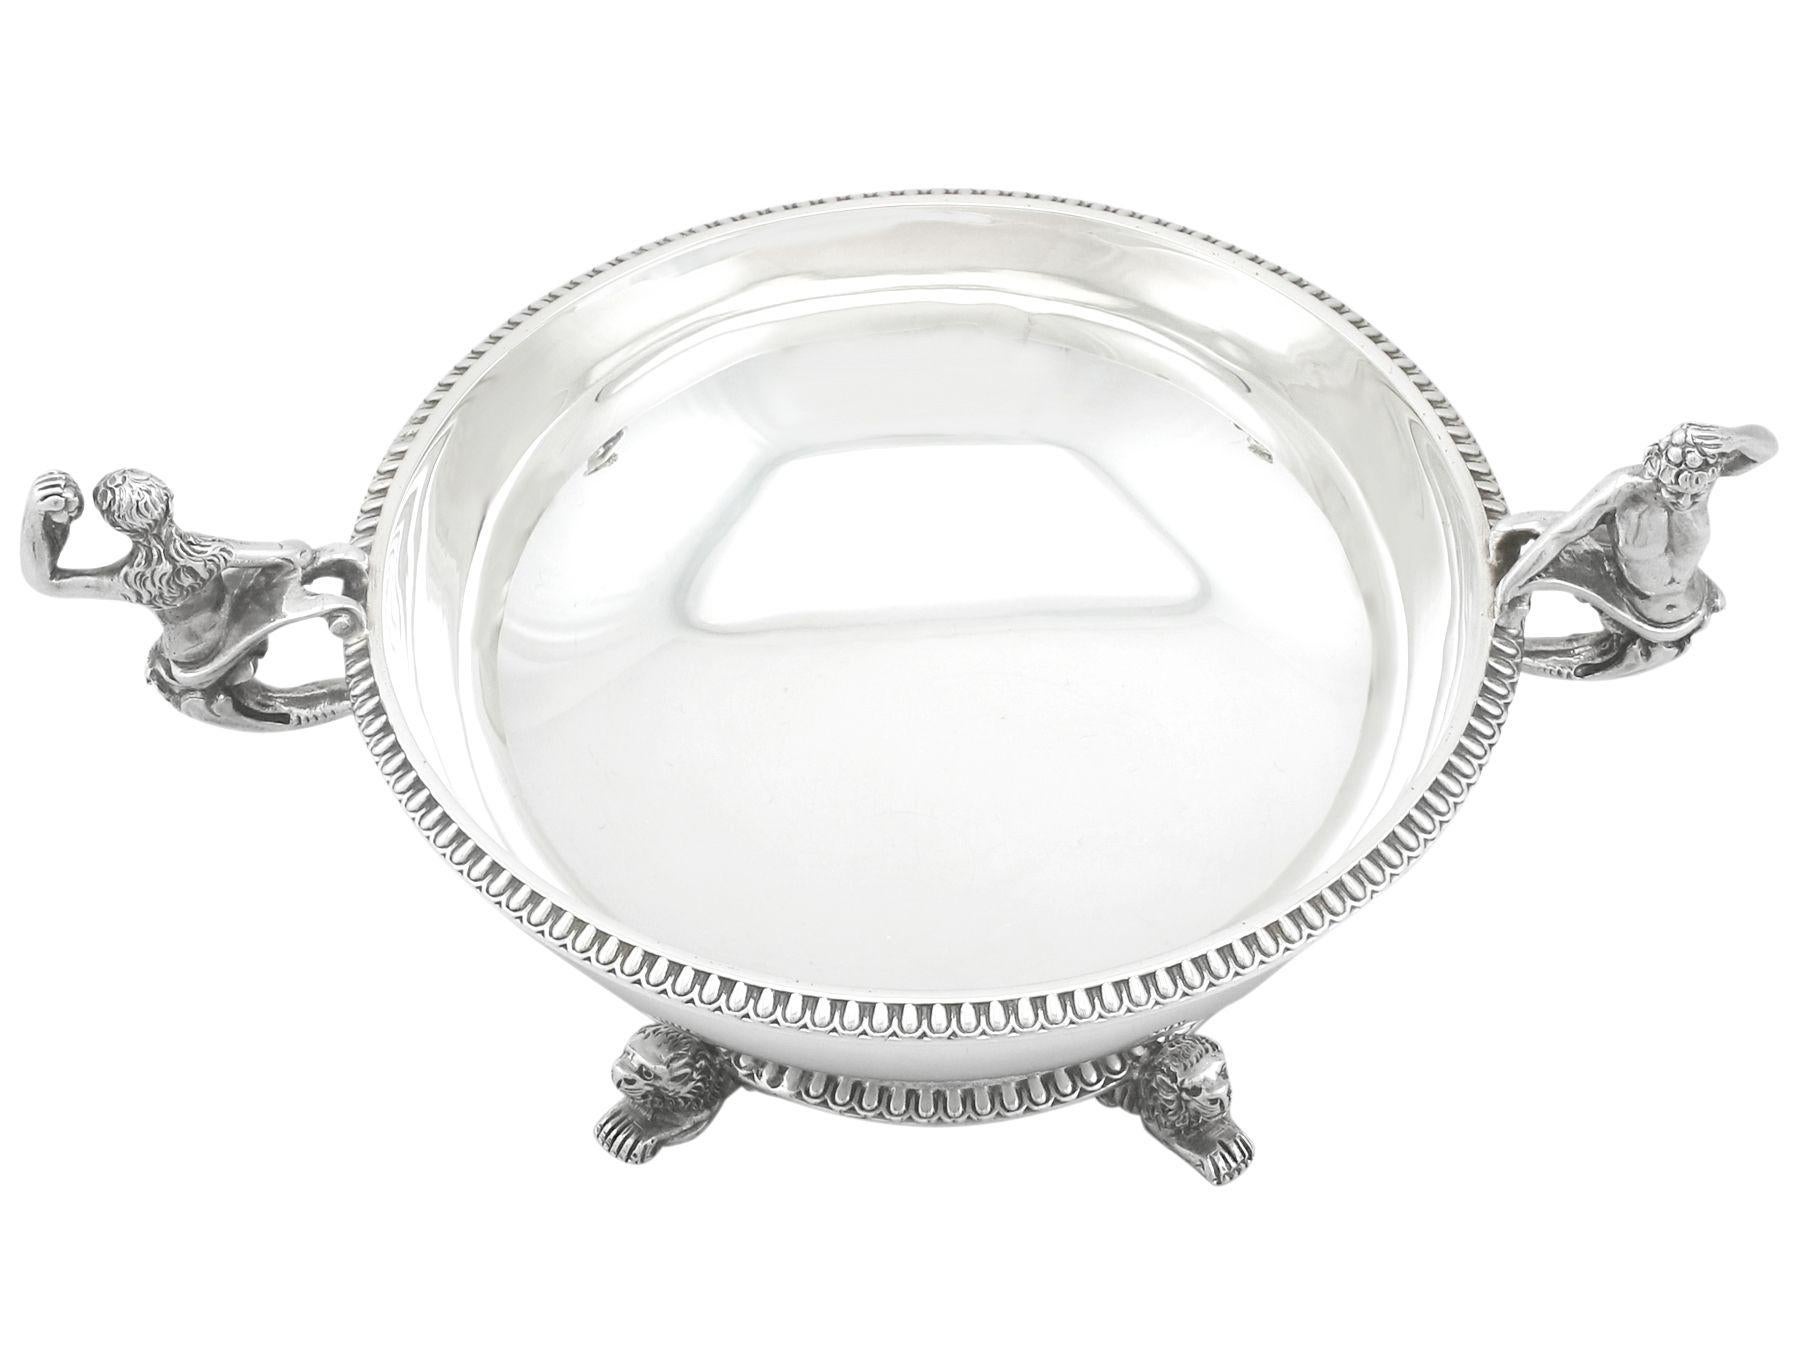 A fine and impressive antique Victorian English sterling silver sugar/bon bon bowl; an addition to our dining silverware collection

This fine antique Victorian sterling silver bon bon/sugar bowl has a plain circular rounded form.

The surface